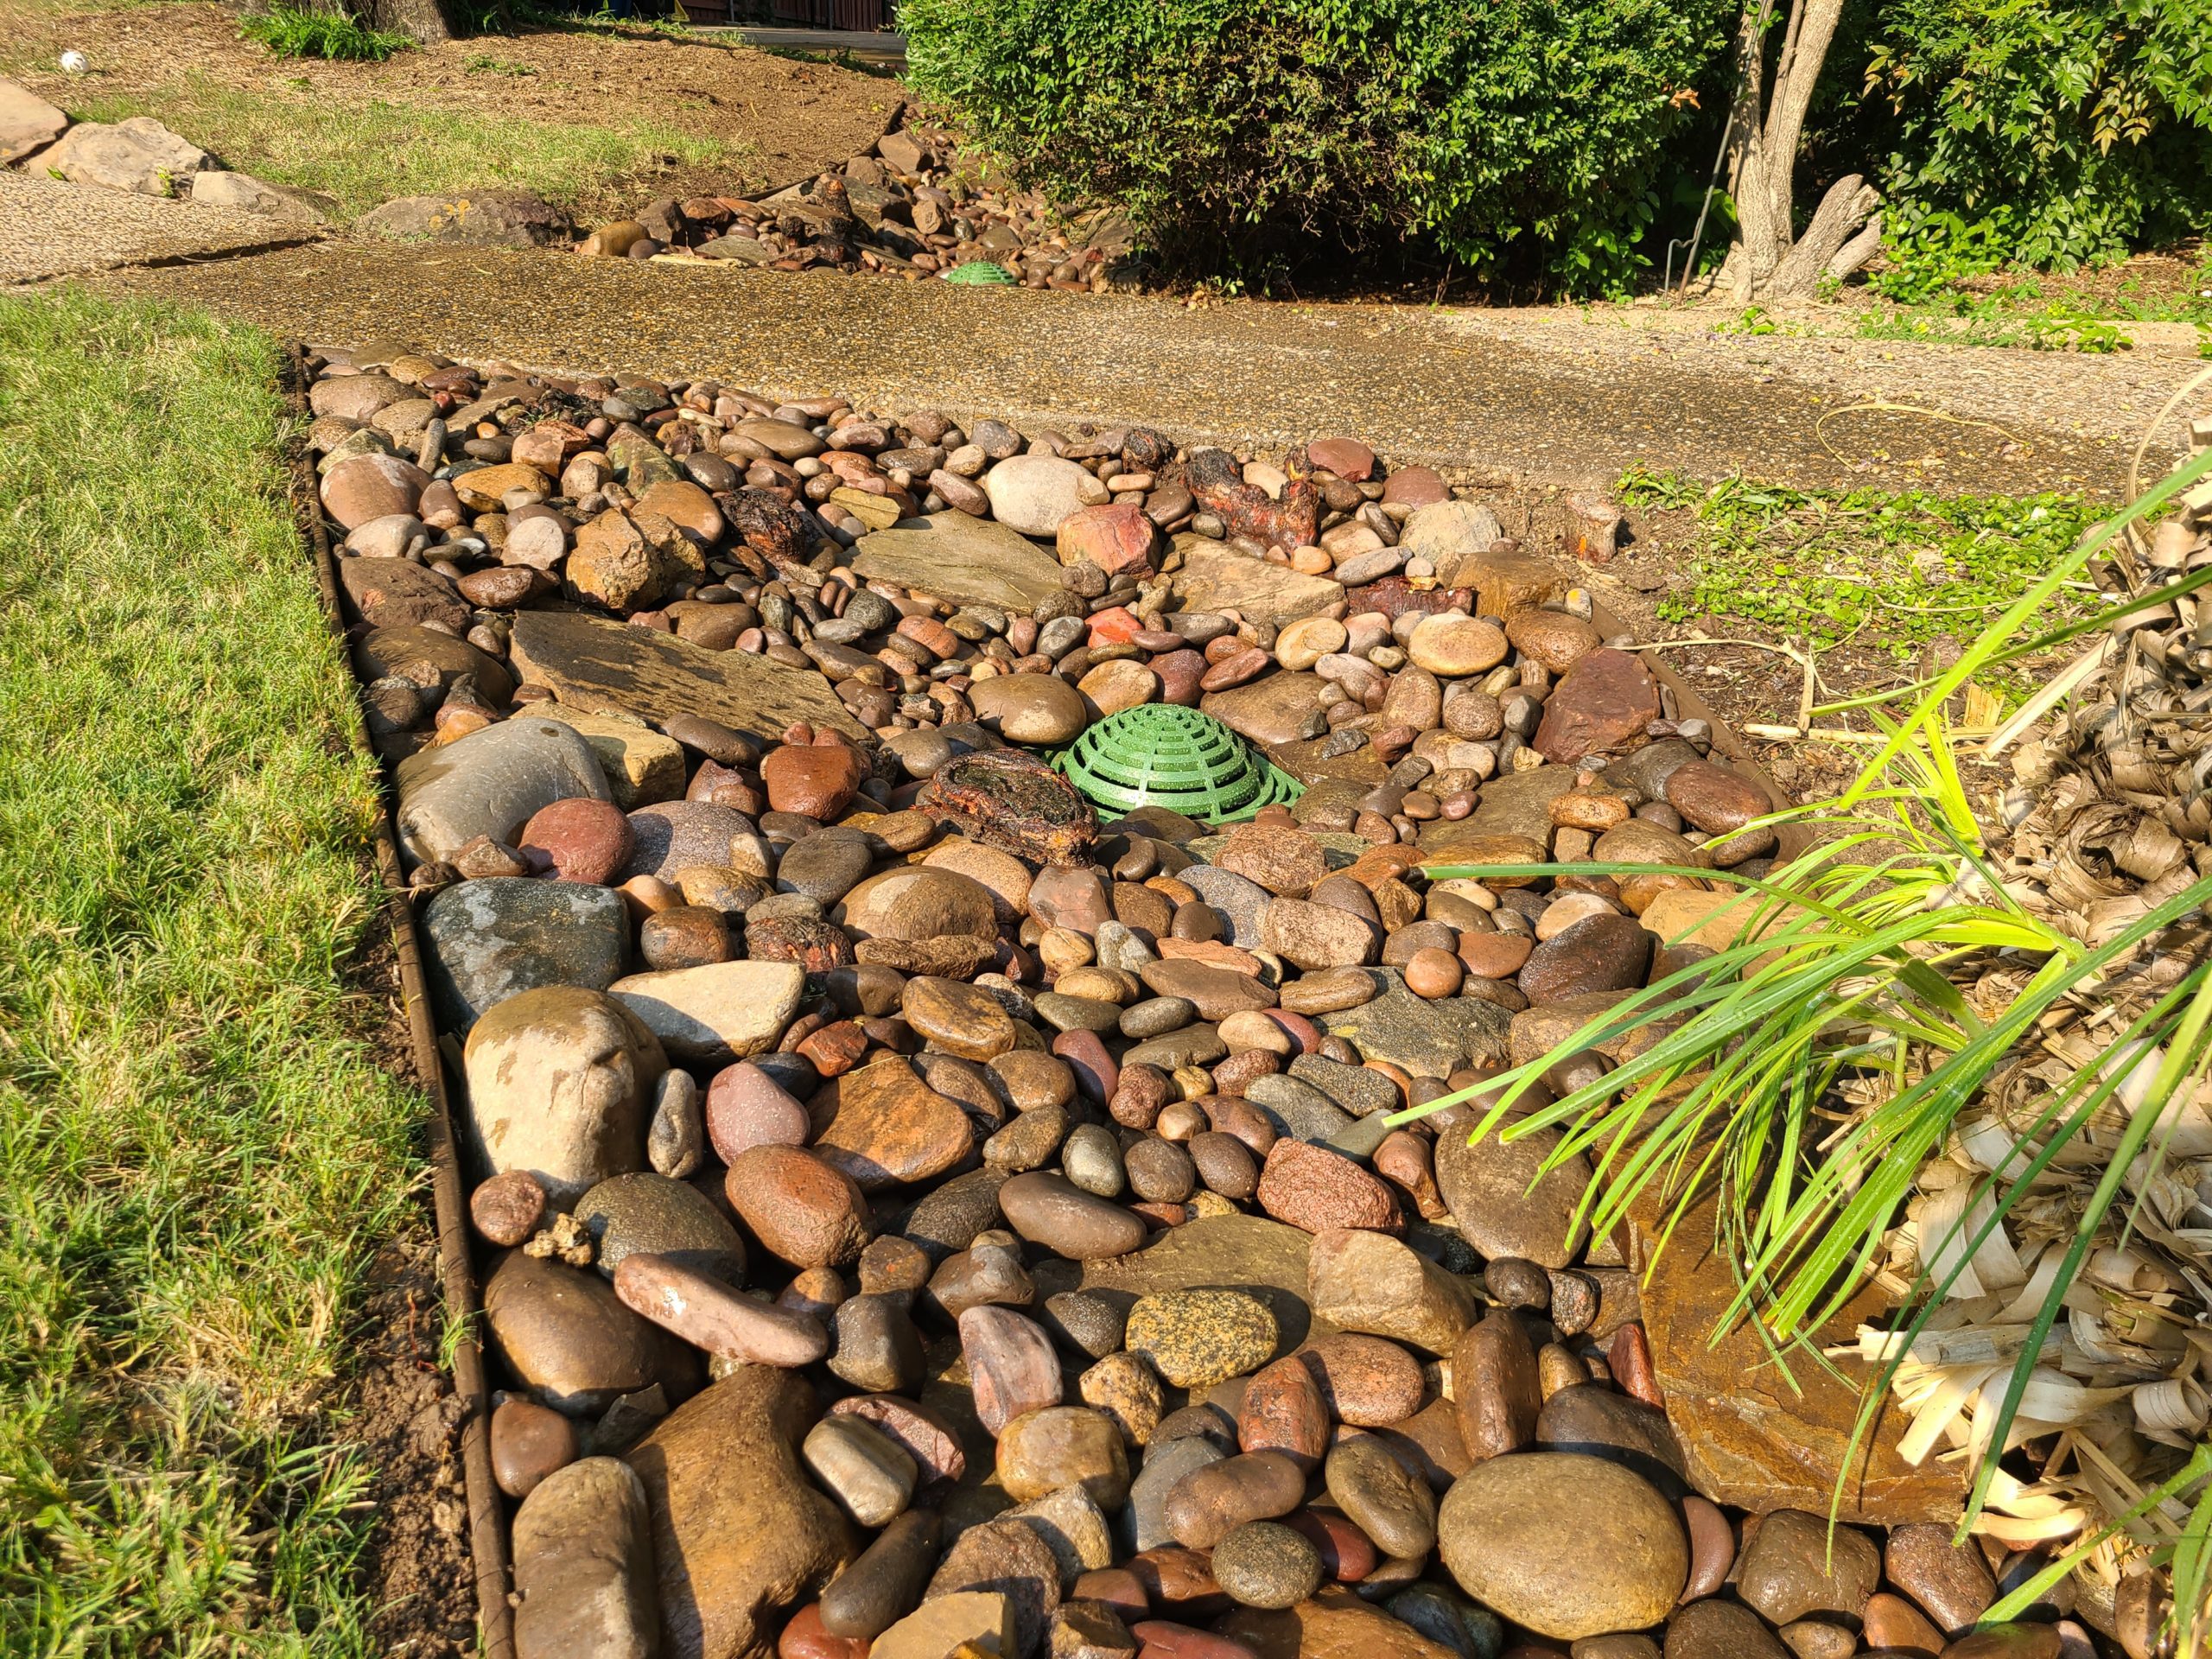 A lawn with some small rocks and a drainage system at the middle